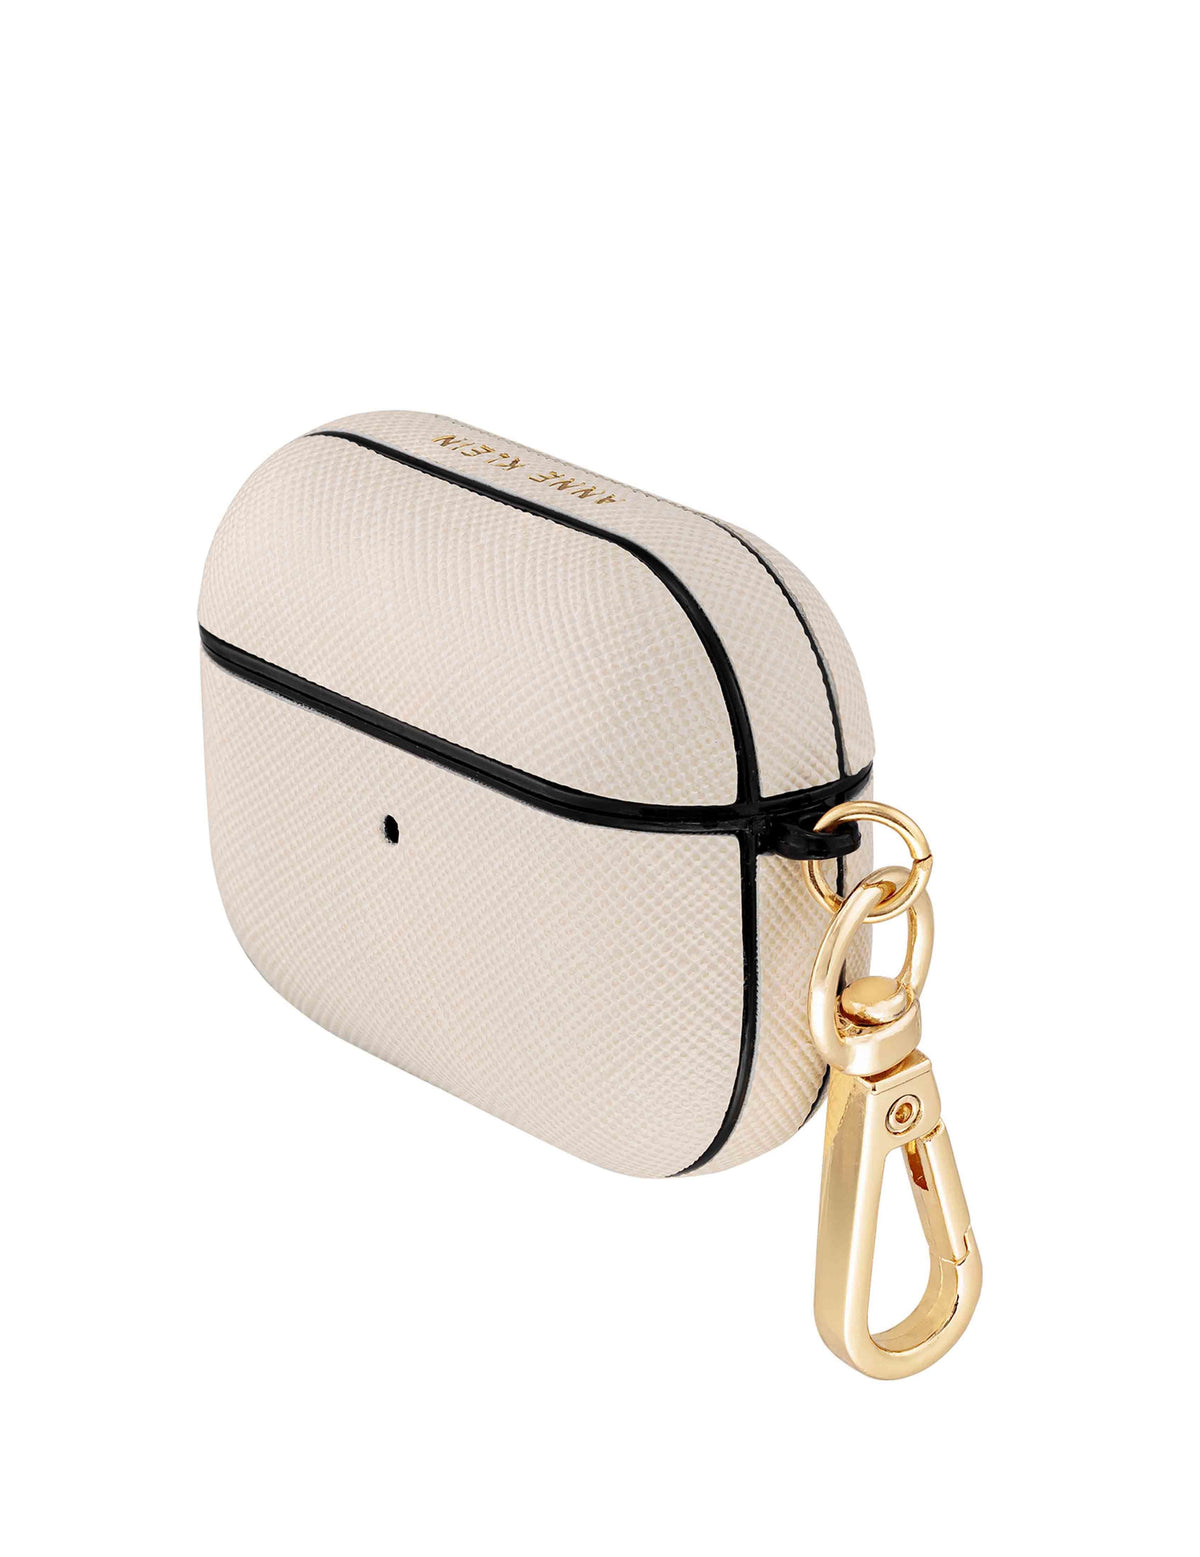 Anne Klein Ivory/Gold-Tone Saffiano Vegan Leather AirPods® Pro Case